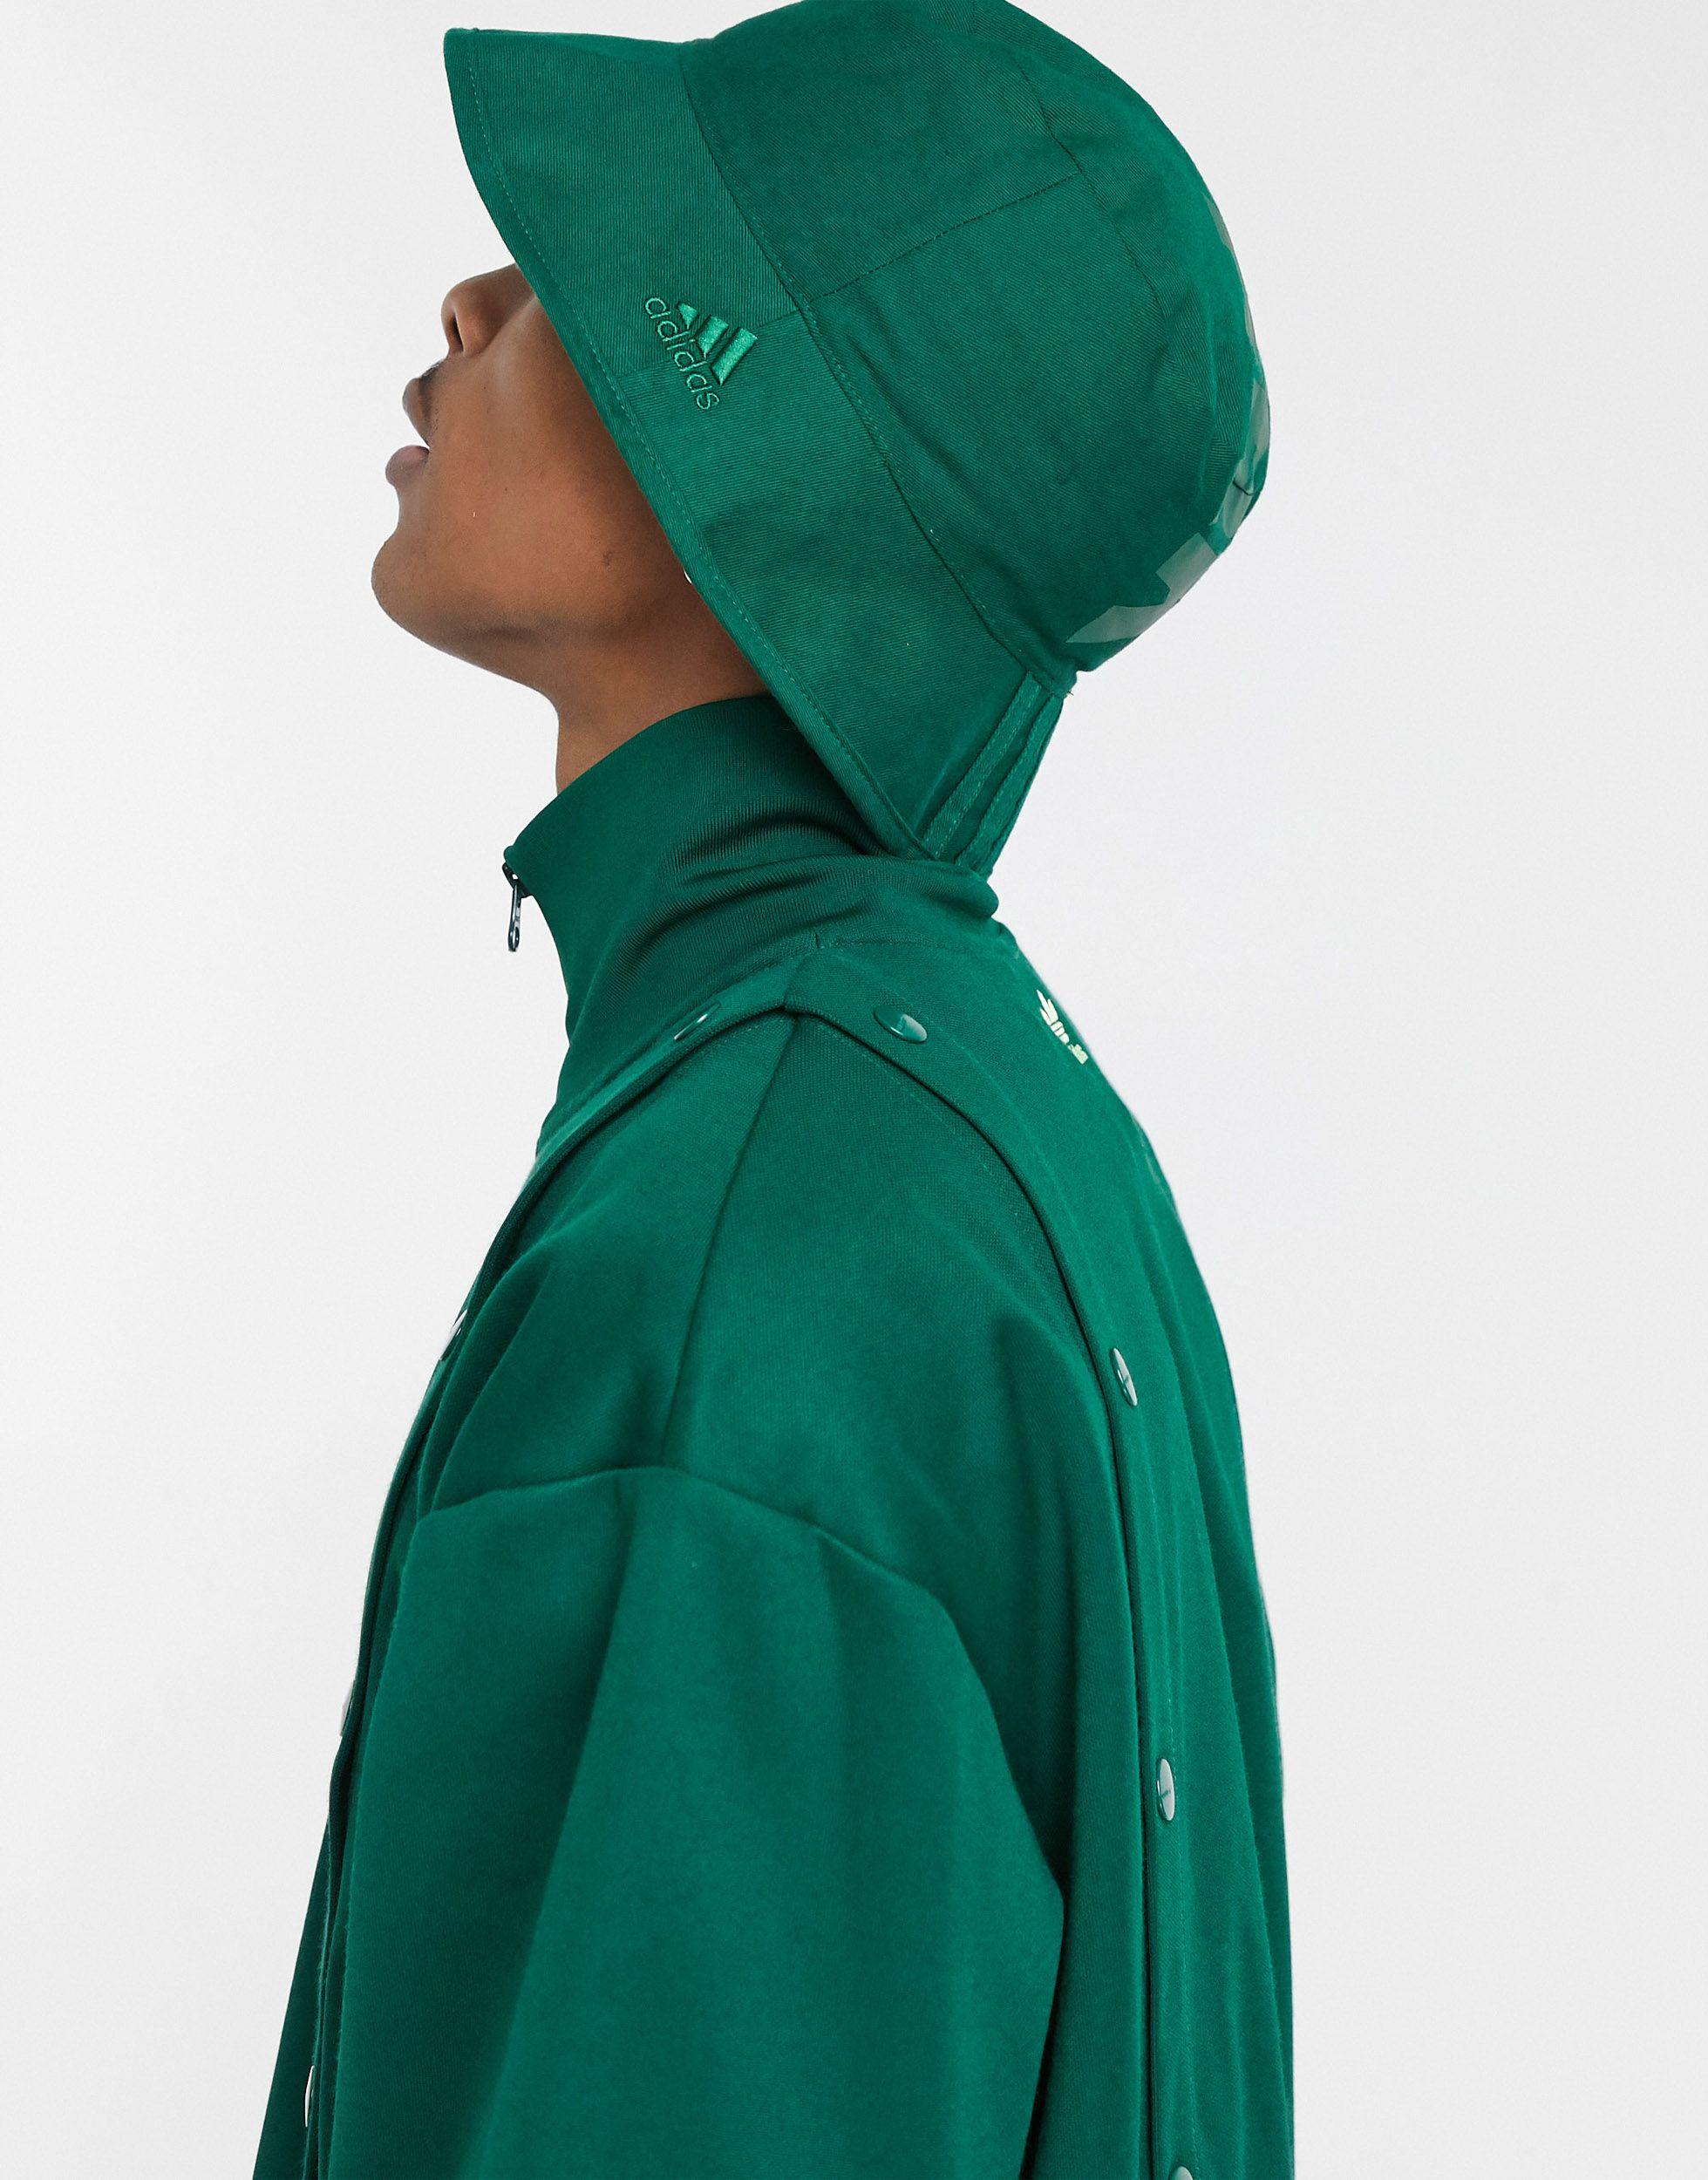 Ivy Park Adidas X Reversible Bucket Hat in Green | Lyst Canada